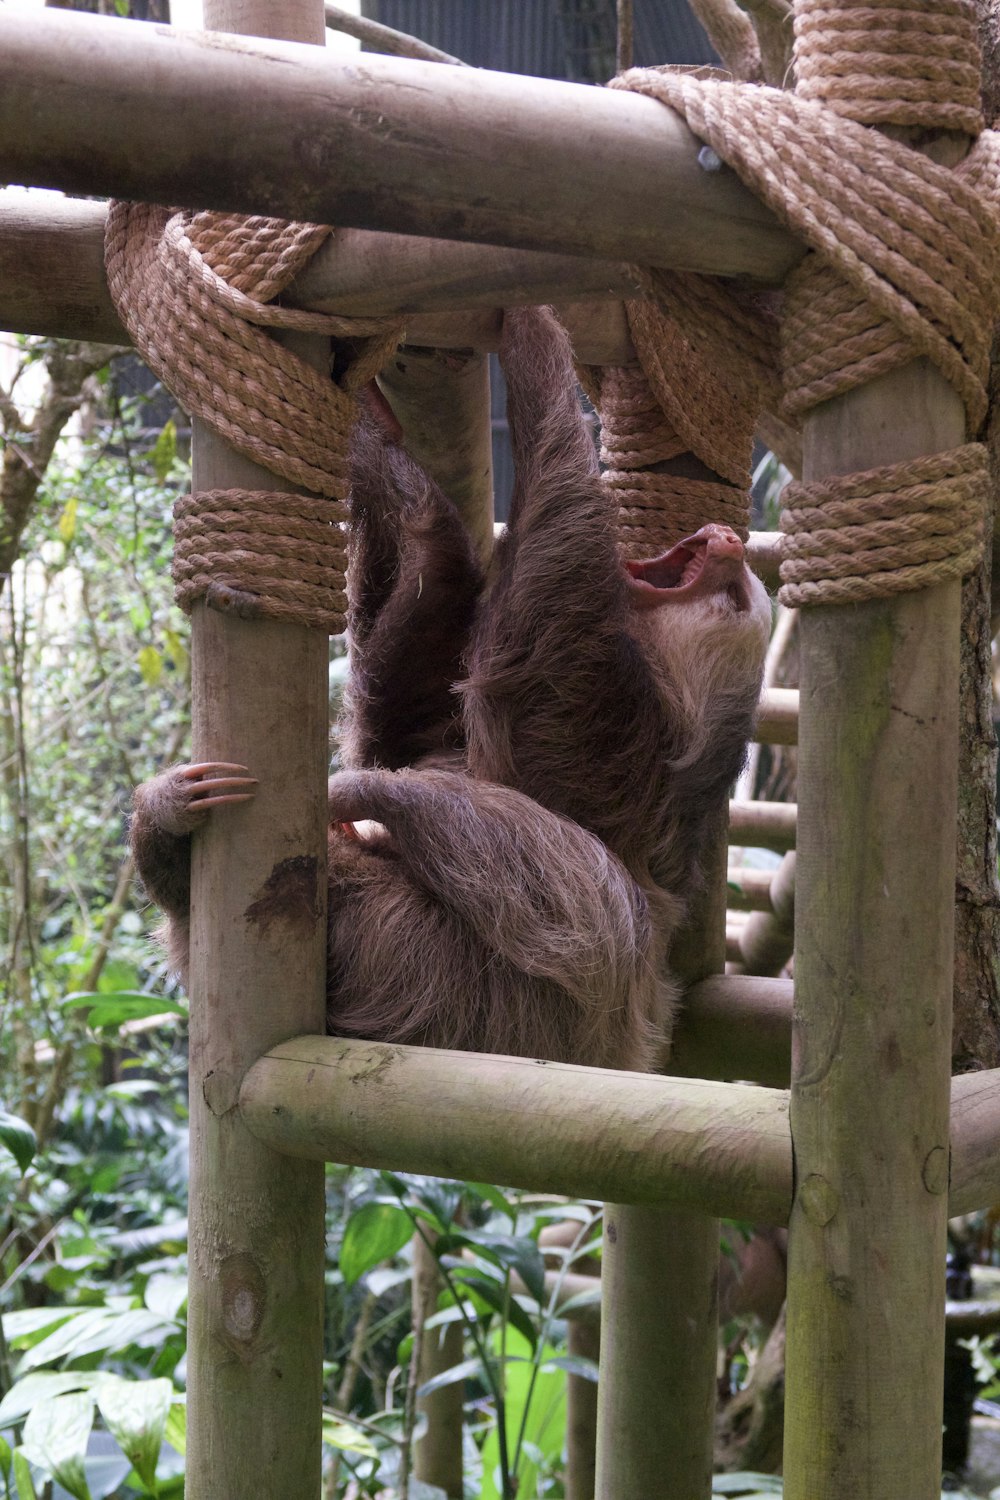 a baby sloth hanging from a wooden structure